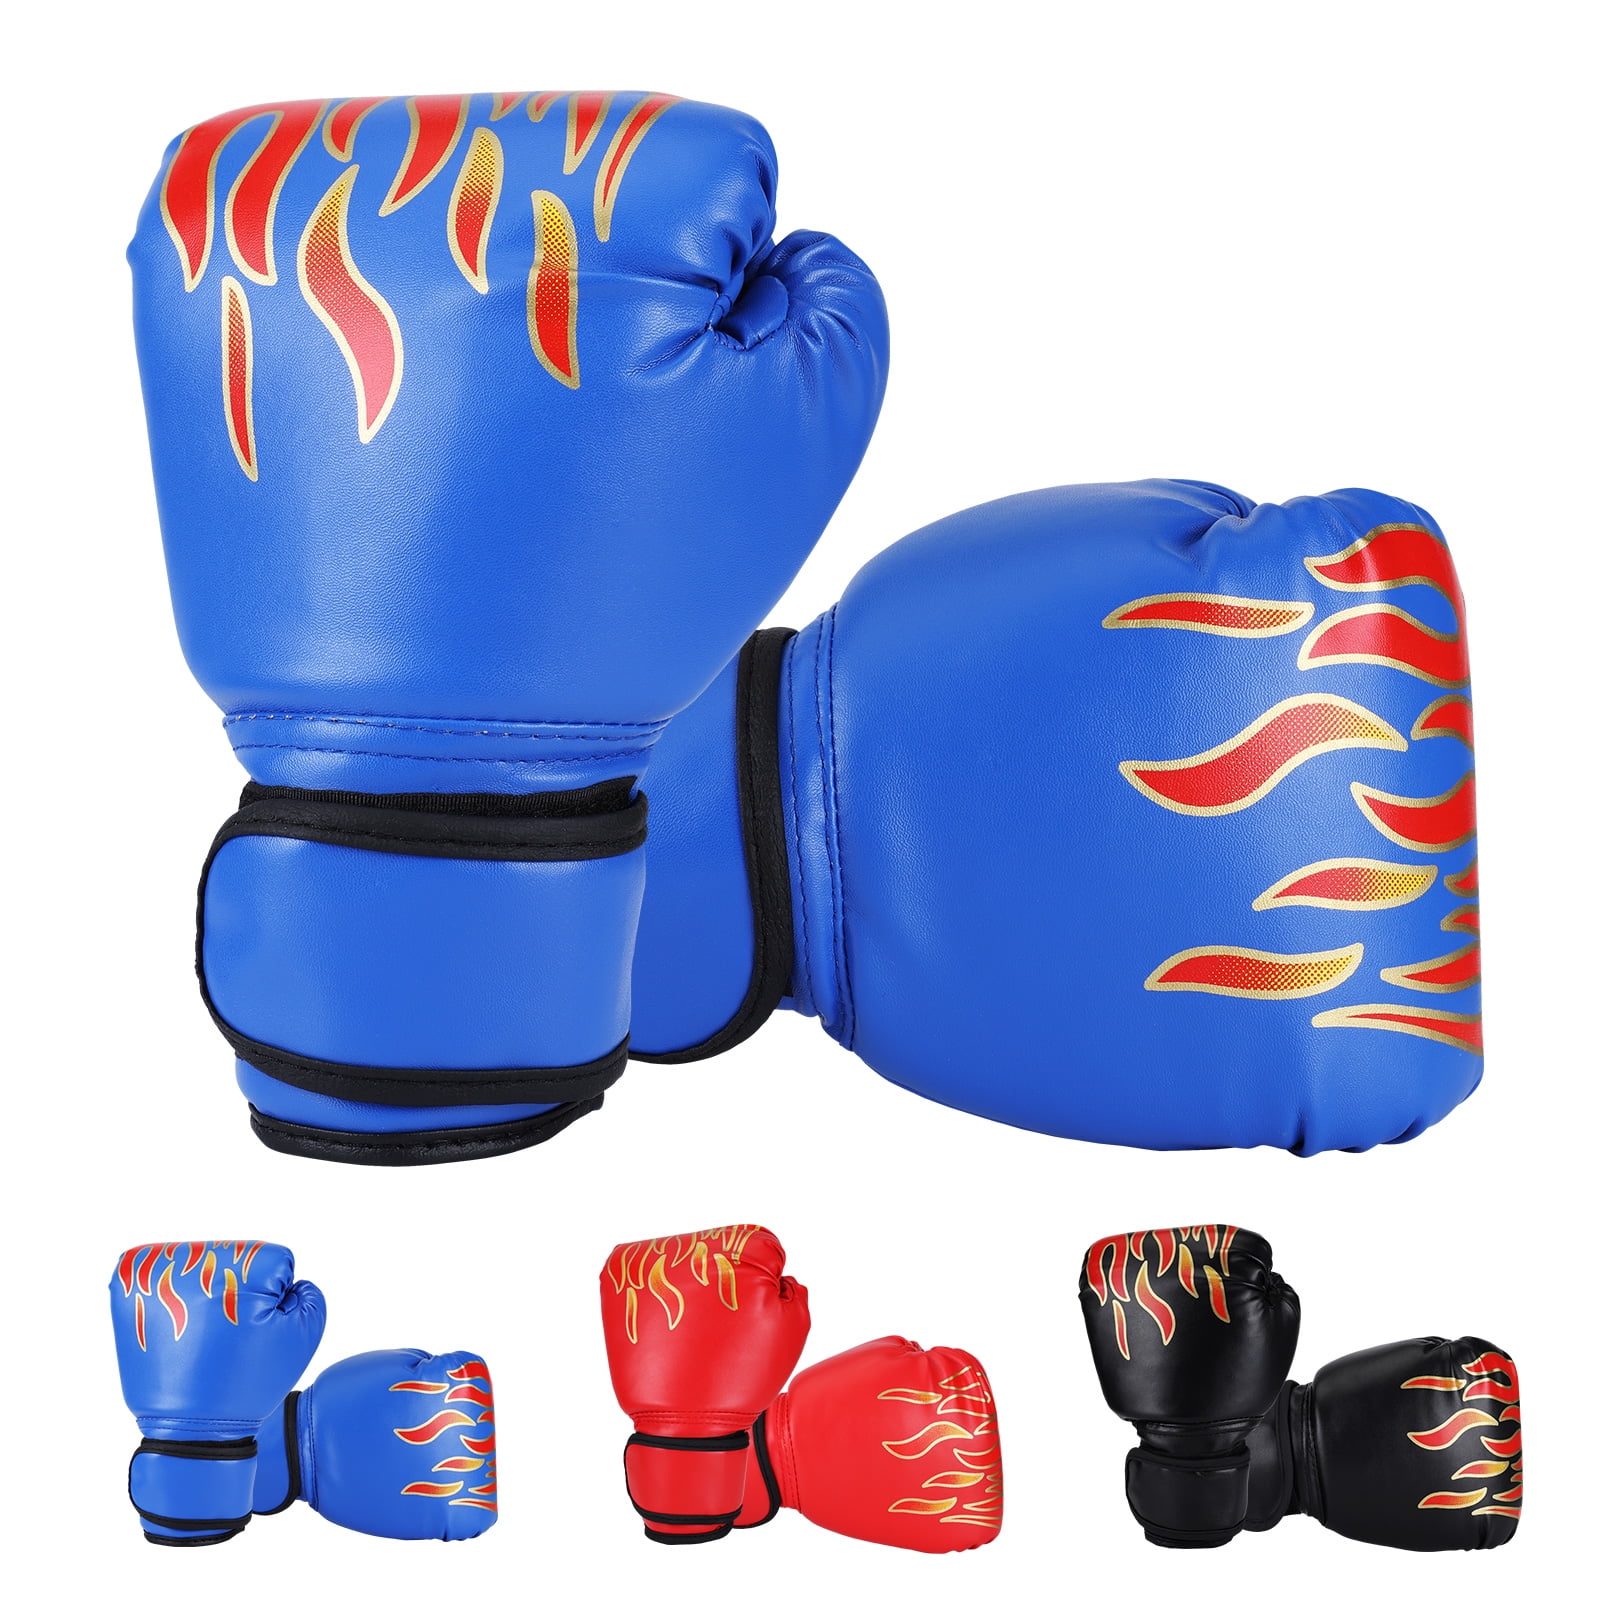 Boxing Curved Focus Punching Mitts - Leather Training Hand Pads,Ideal ...